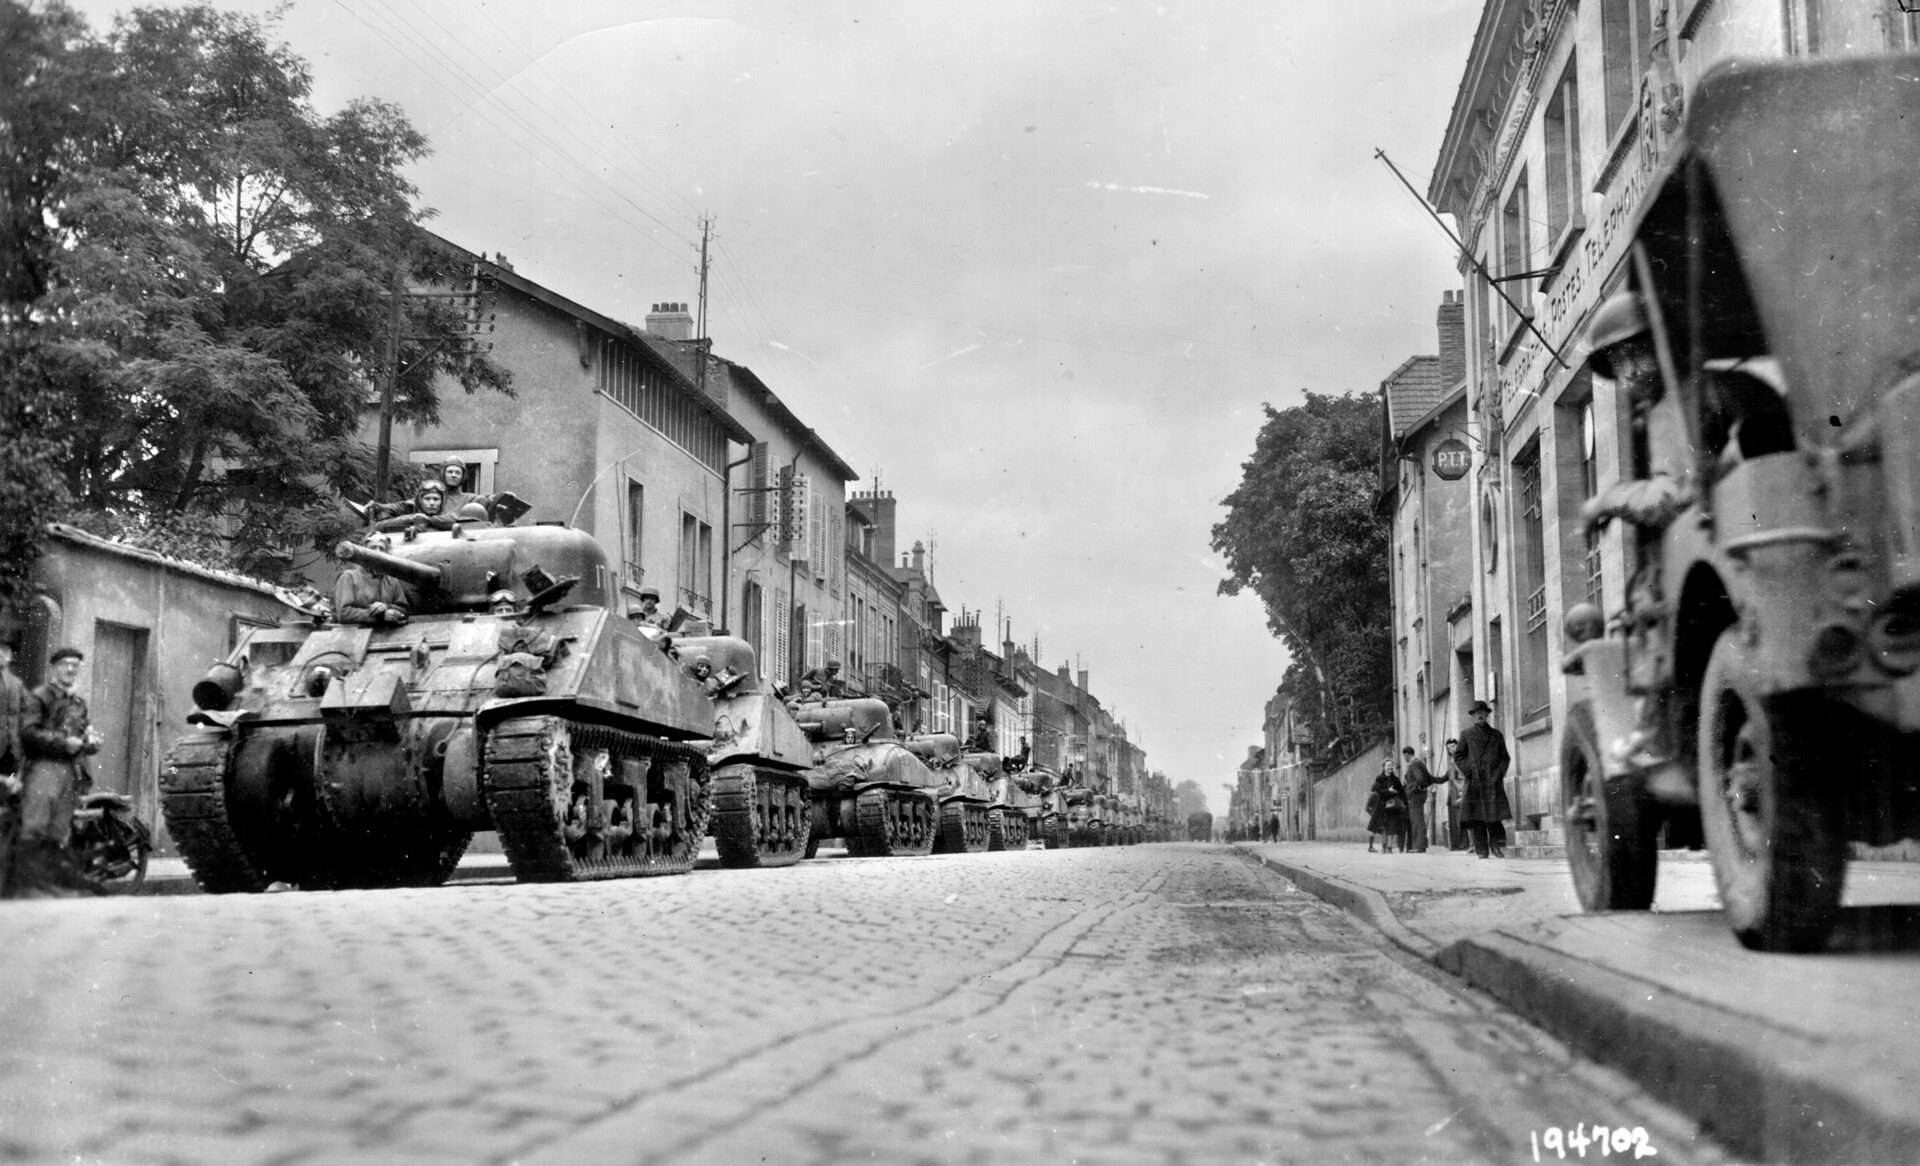 This photo was taken a week after the fighting in and around Luneville ended in the fall of 1944. A long line of American M4 Sherman medium tanks has halted temporarily during the Third Army advance through France toward the German frontier.